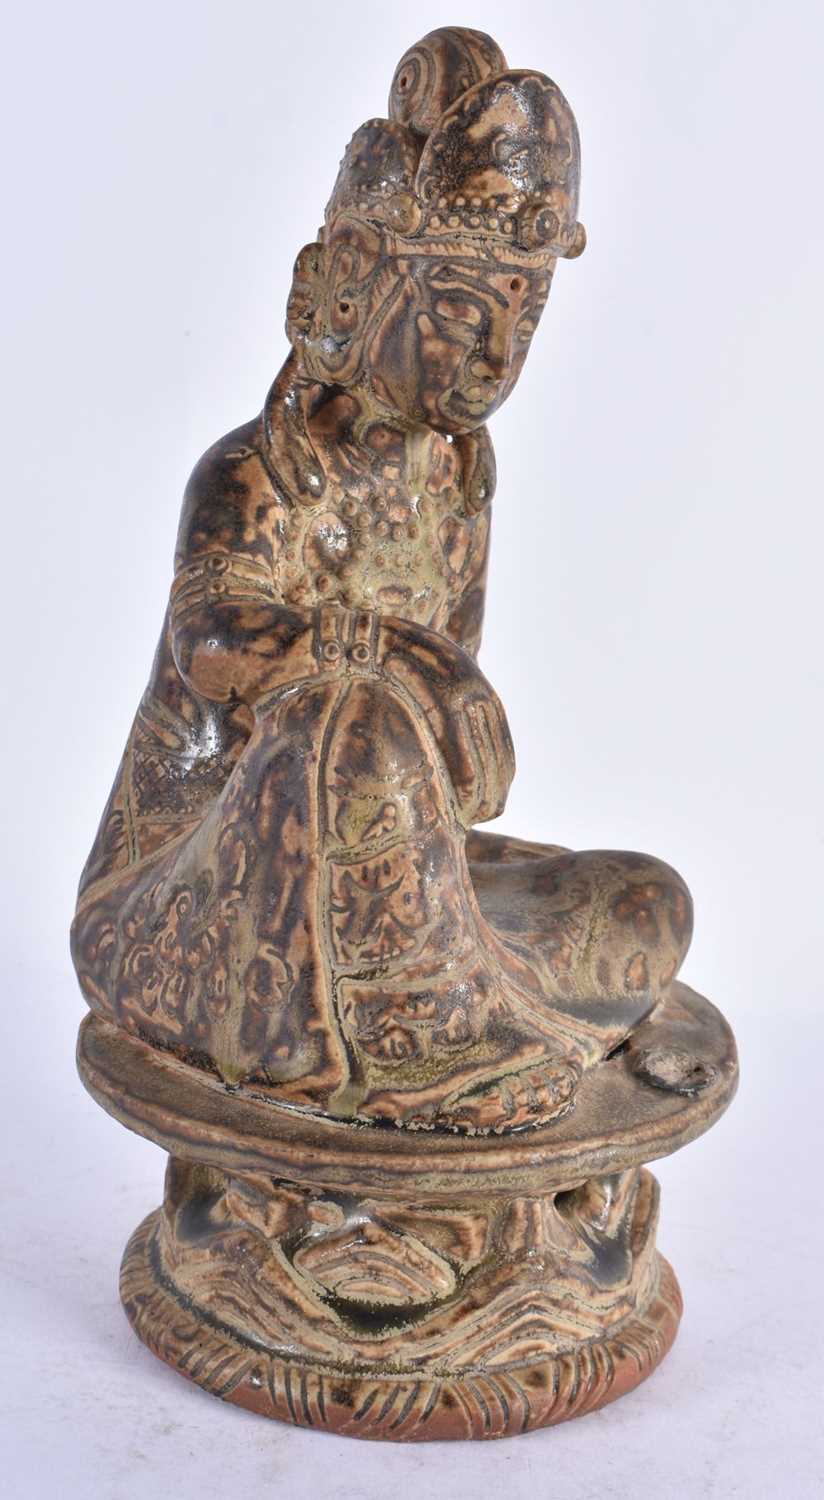 A RARE CHINESE QING DYNASTY CERAMIC POTTERY FIGURE OF A BUDDHA possibly Yue Ware. 21 cm high. - Image 2 of 4